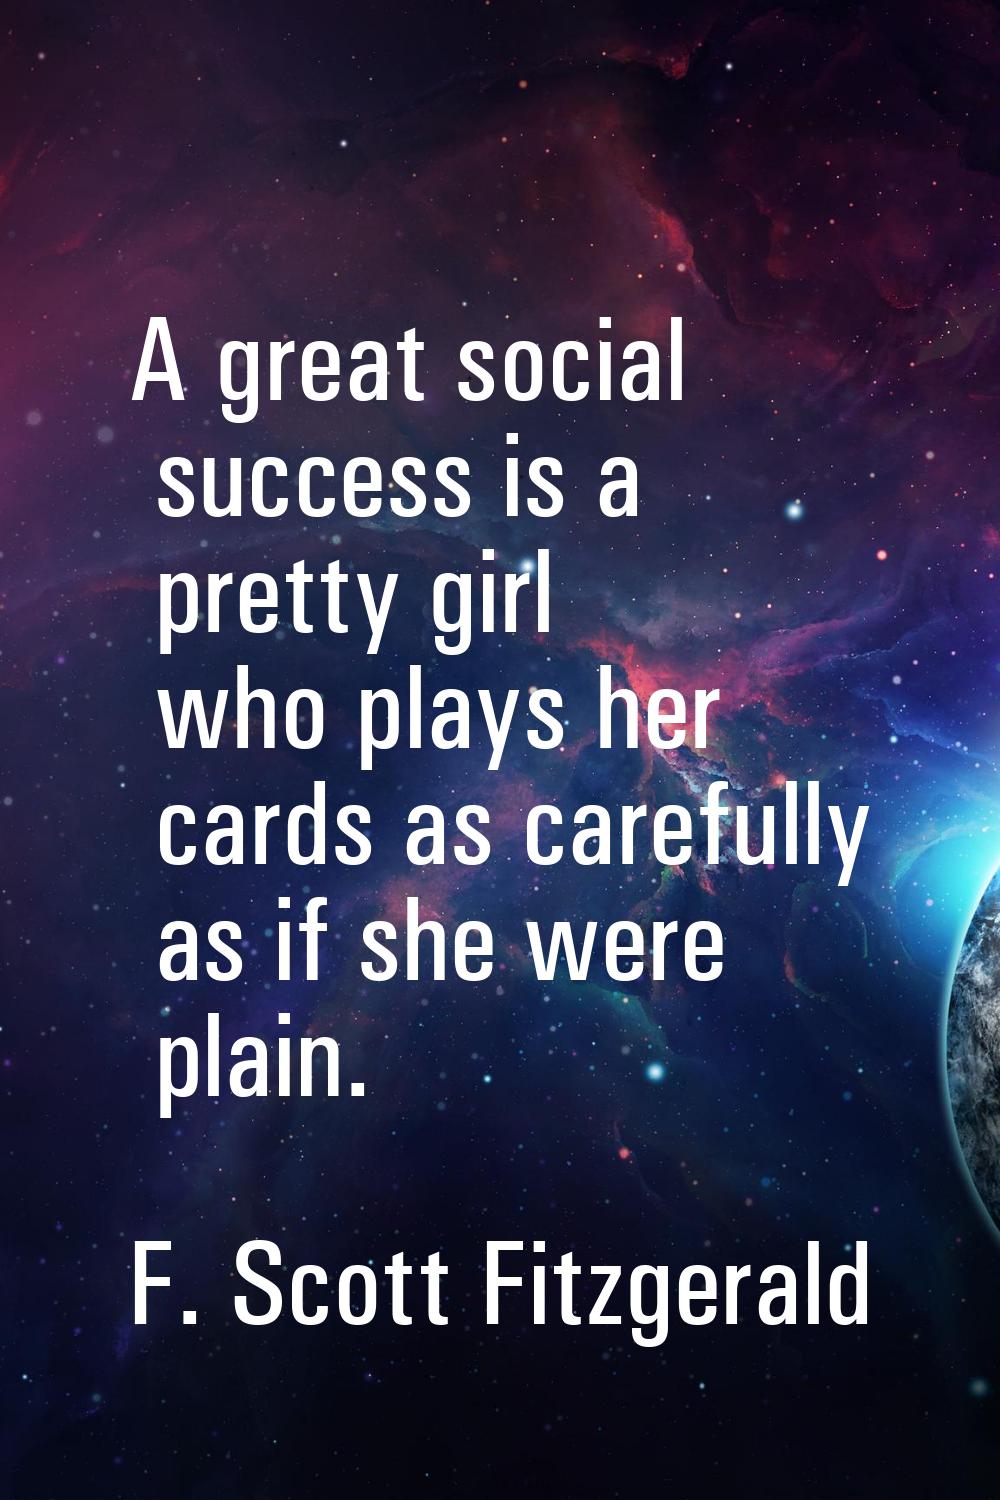 A great social success is a pretty girl who plays her cards as carefully as if she were plain.